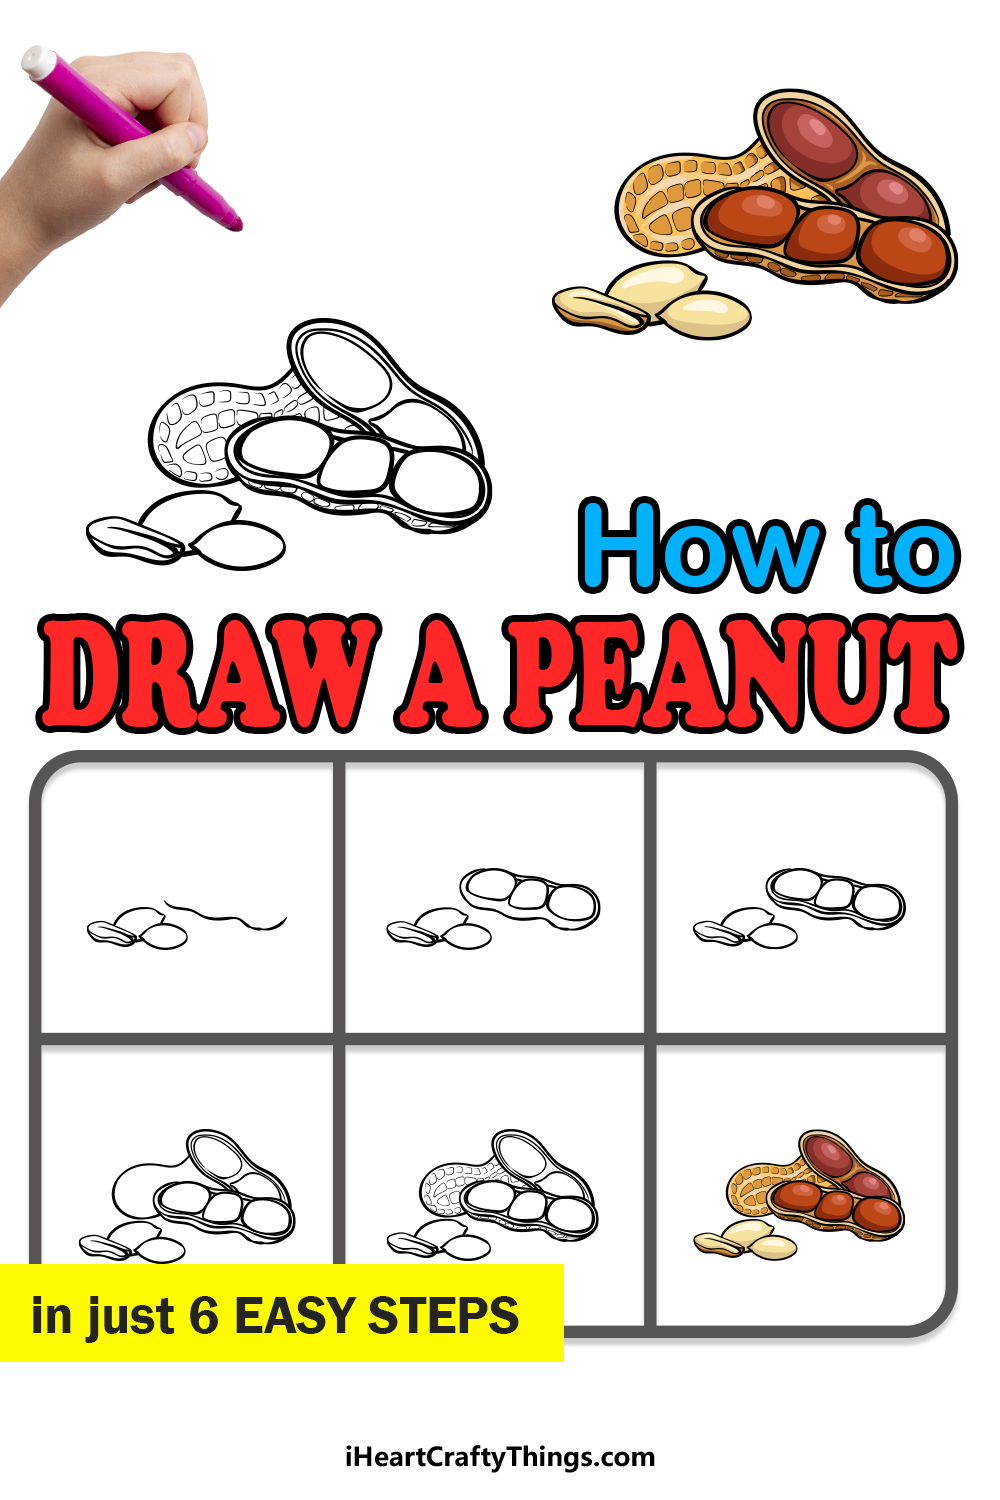 how to draw a peanut in 6 easy steps